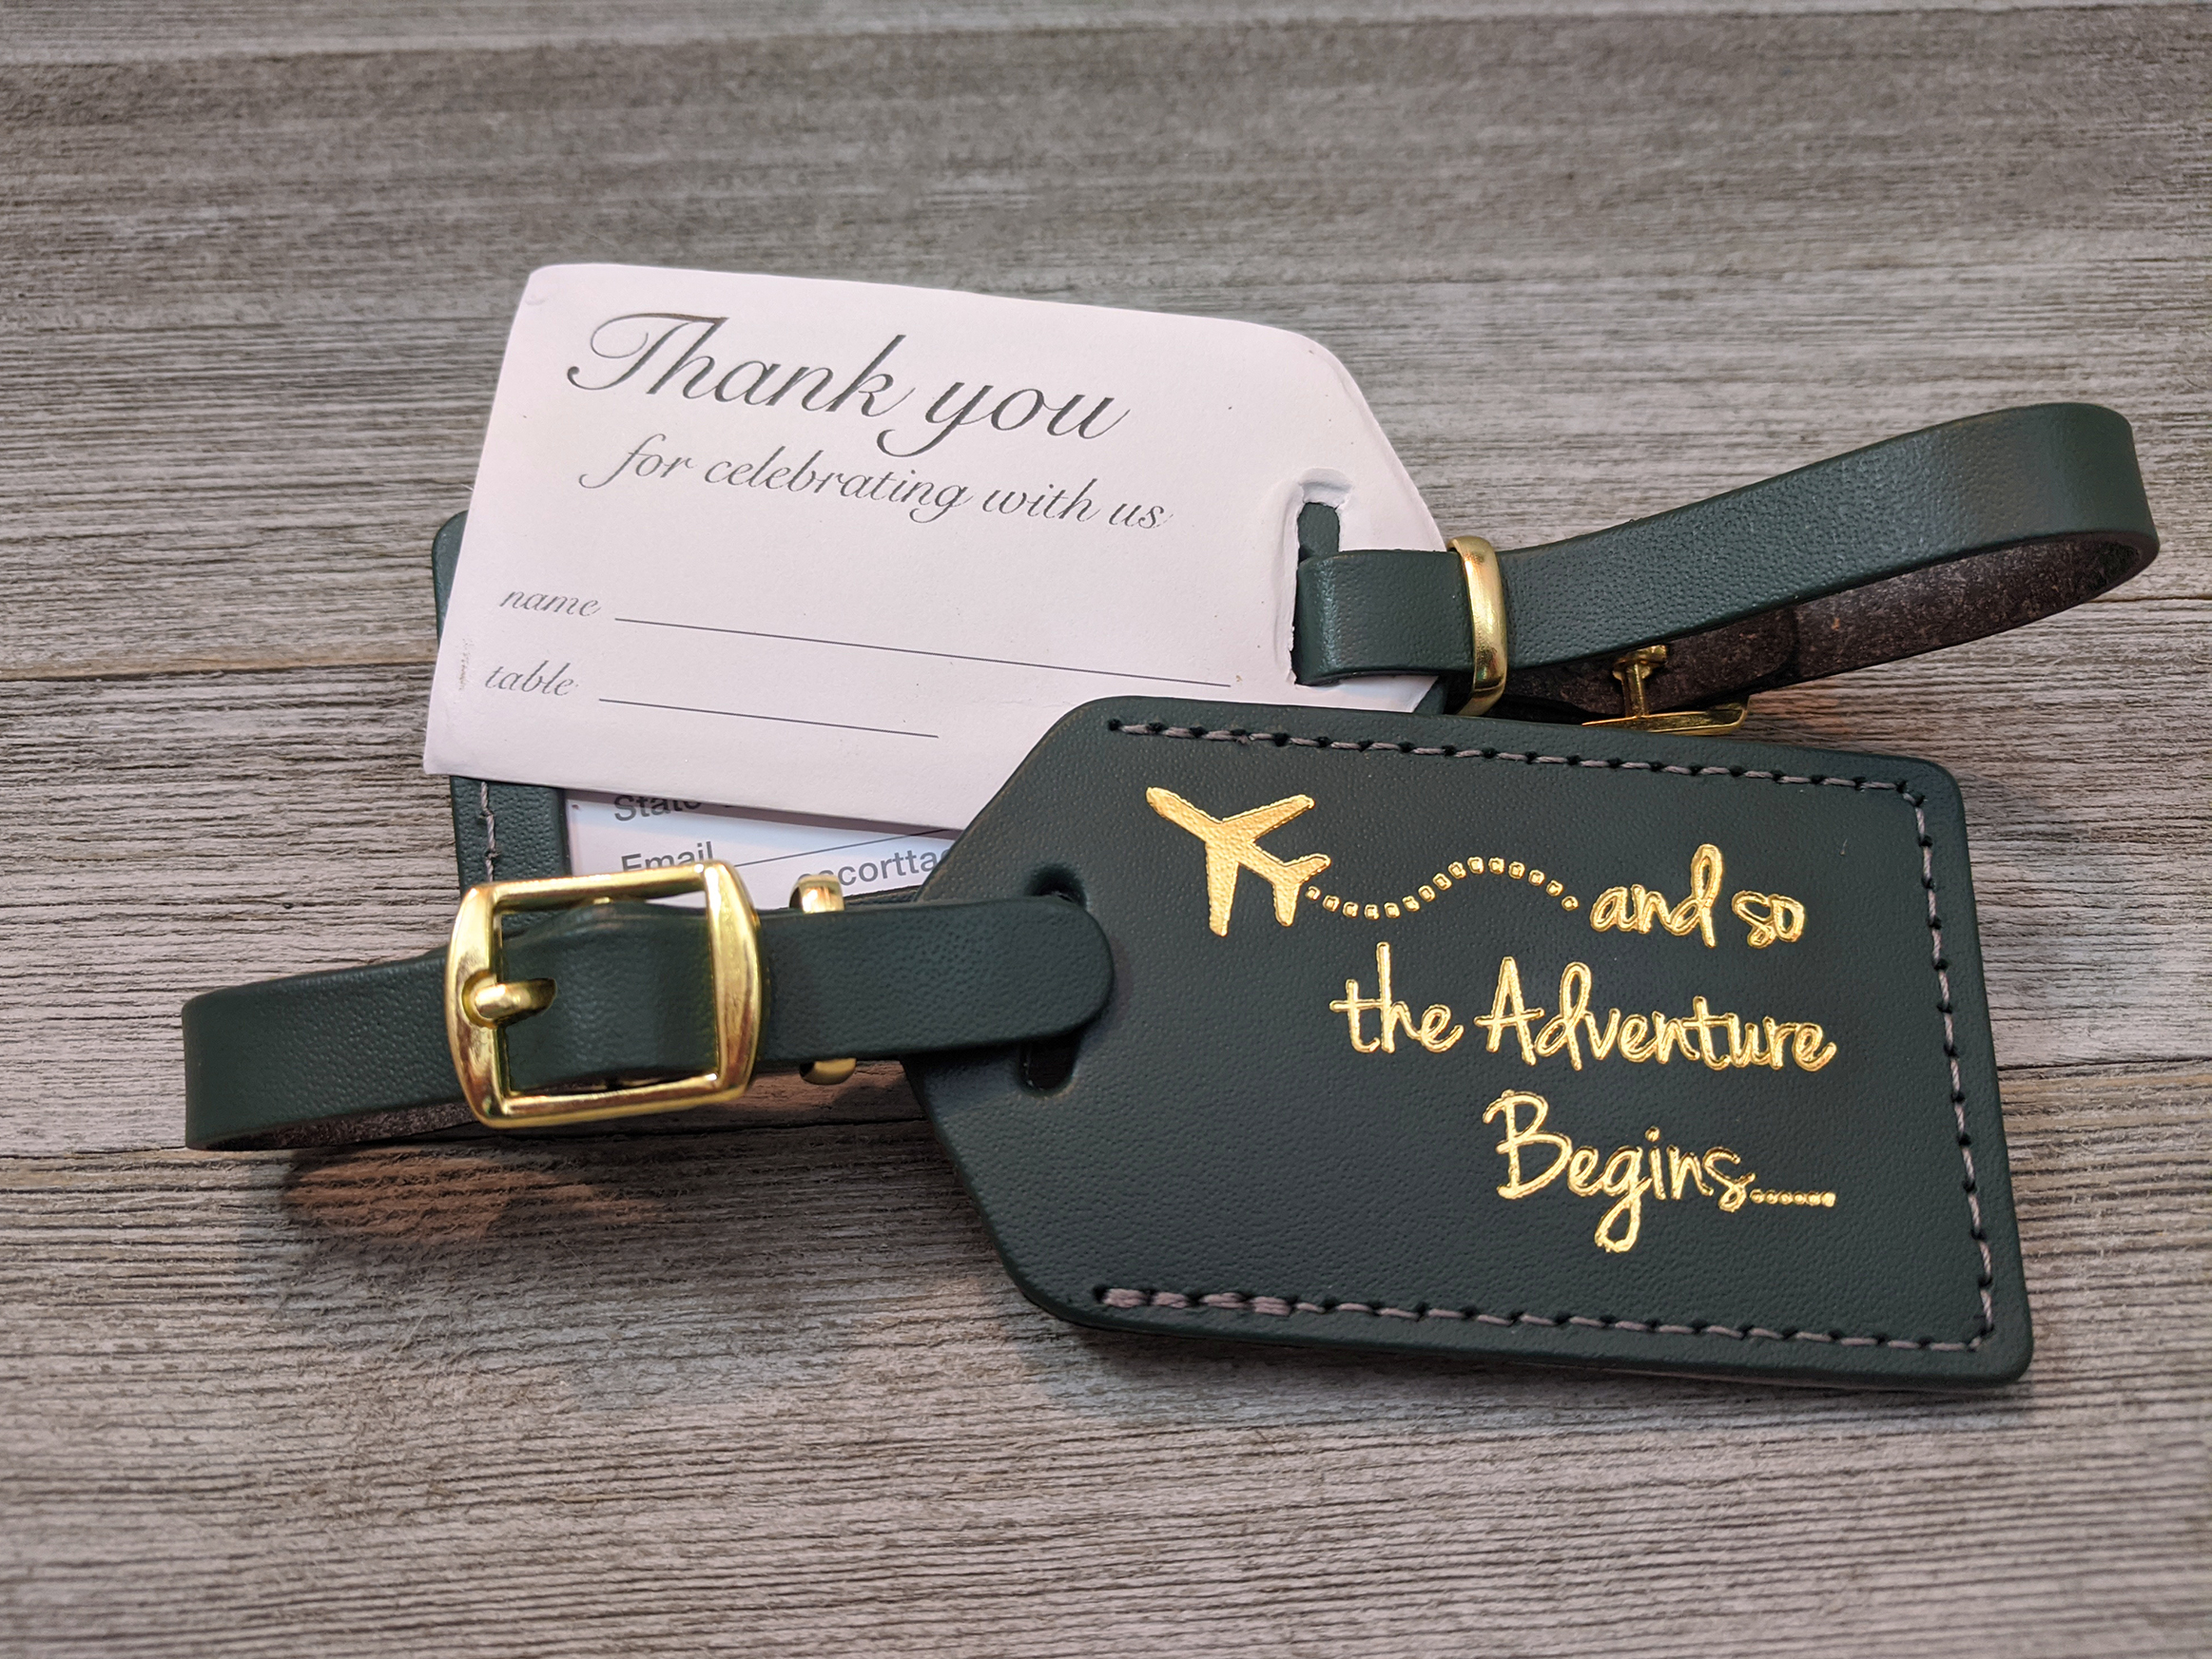 Leahter Luggage Tags - Brilliant Promos - Be Brilliant!